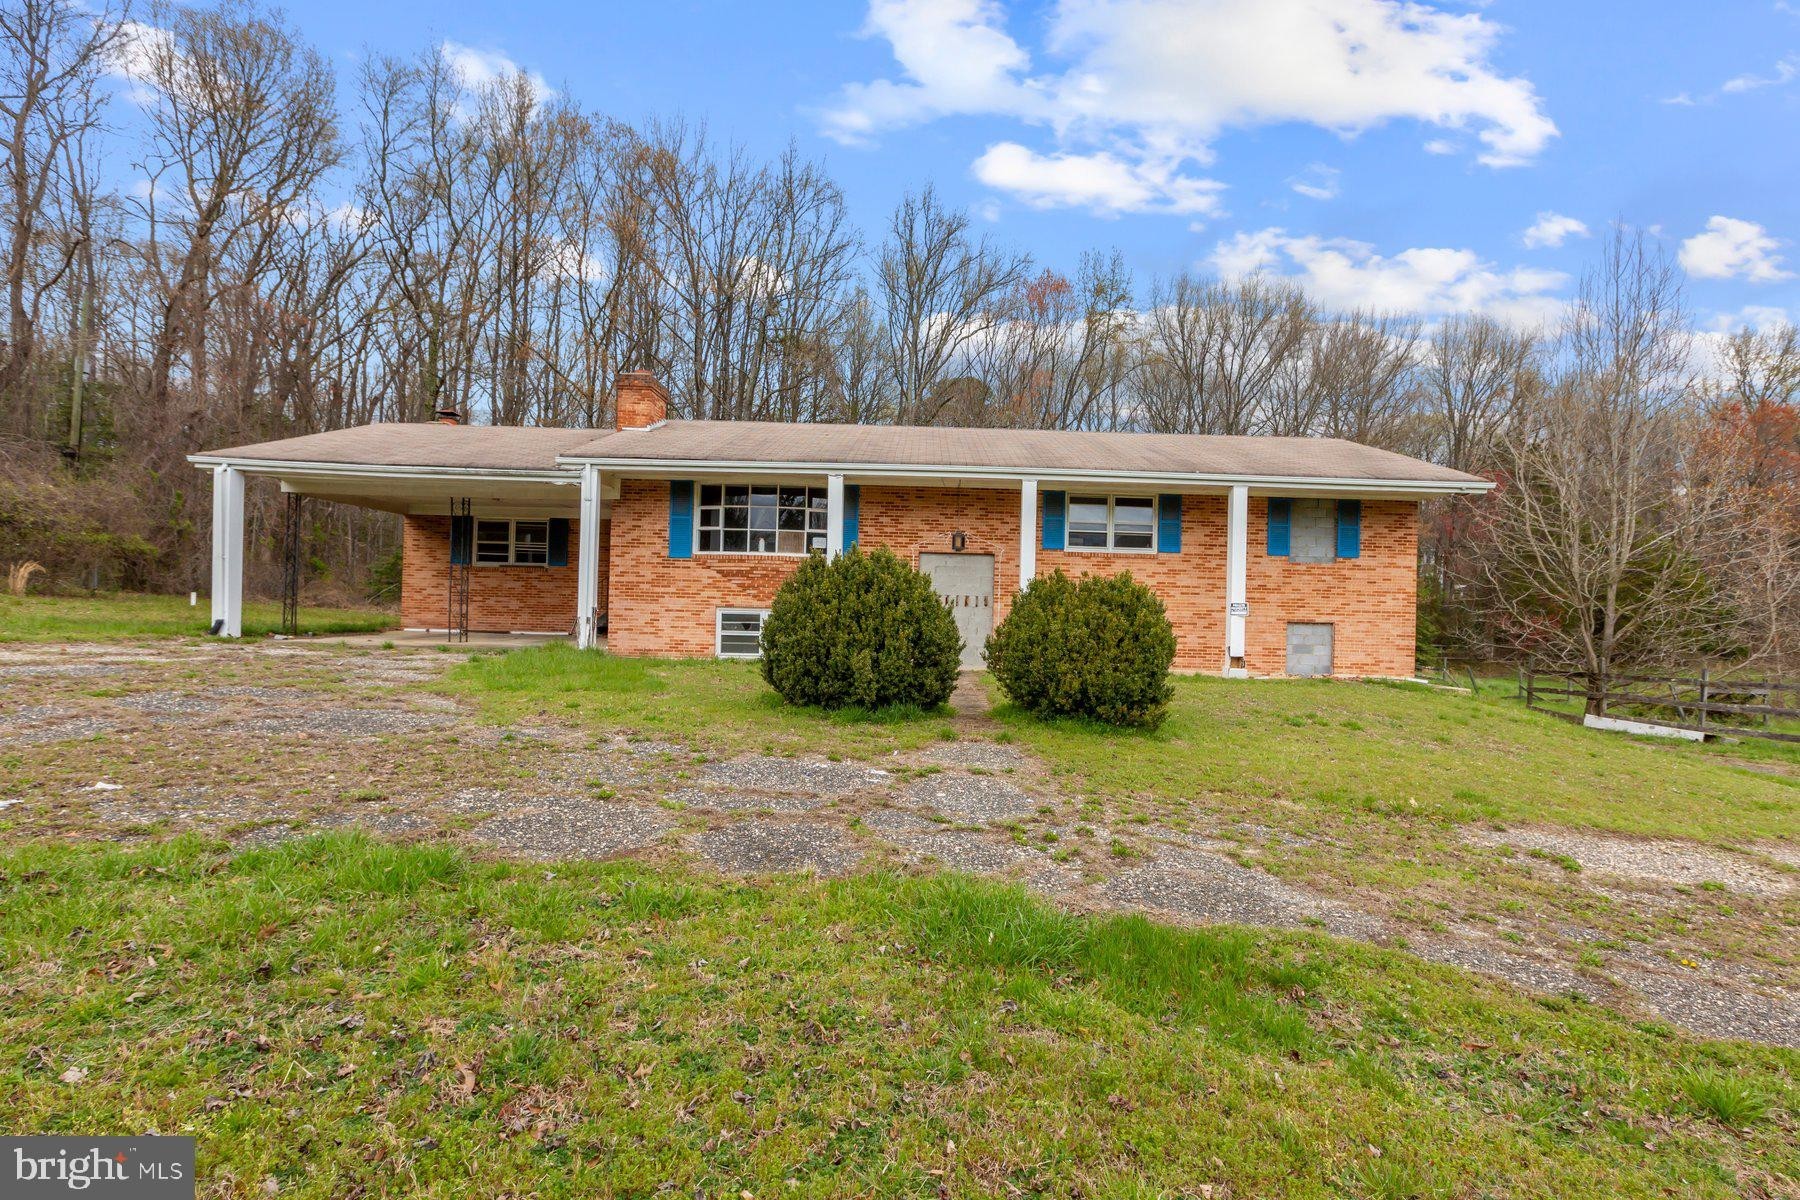 1. 9800 Rosaryville Road